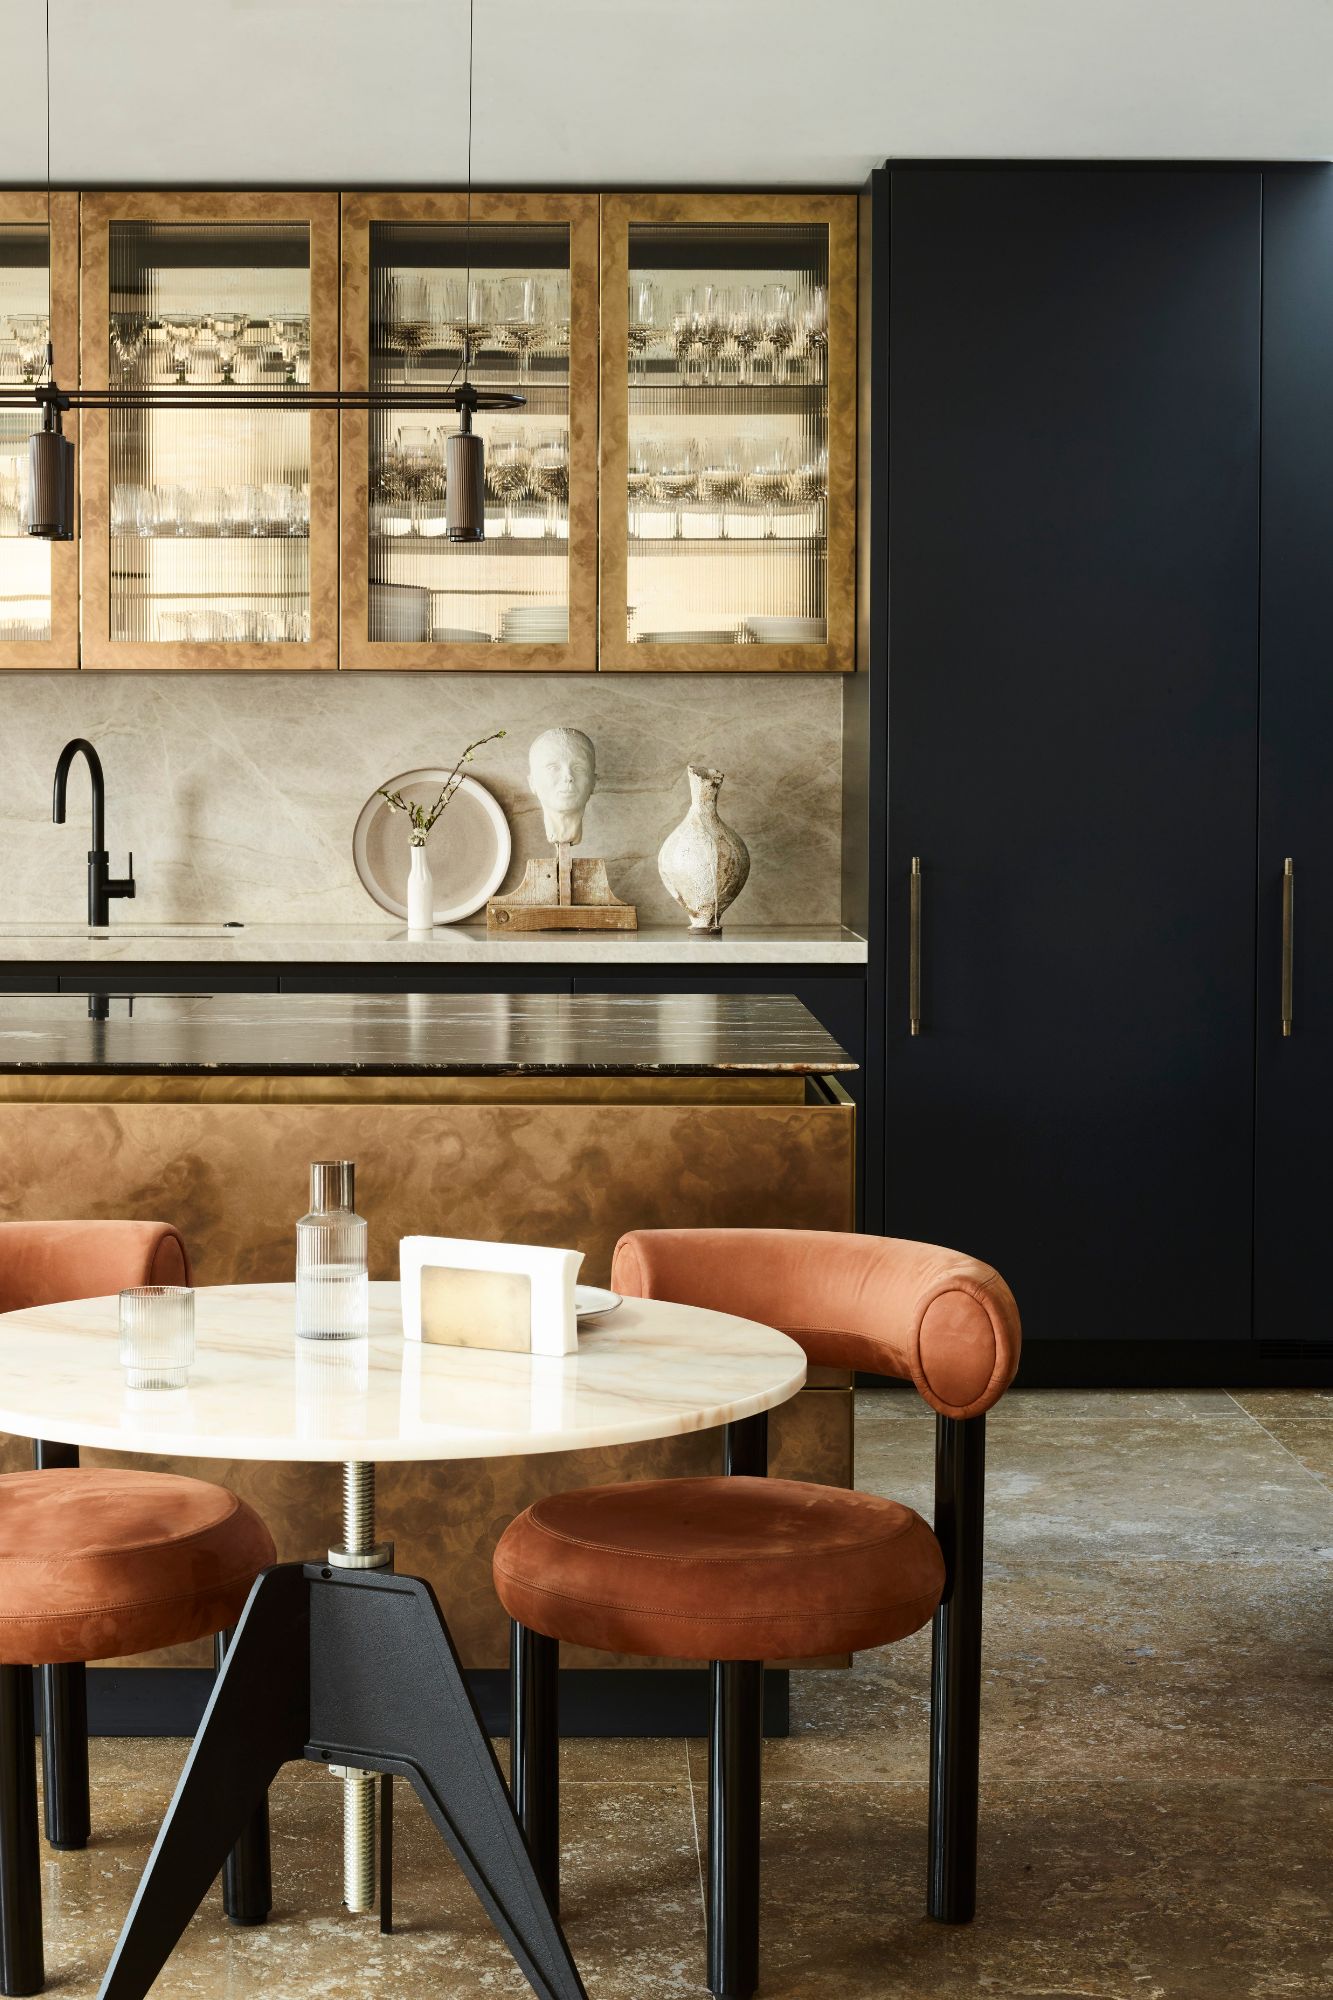 Roundhouse, The Story Behind Roundhouse Design: Creating Bespoke Kitchens and Furniture